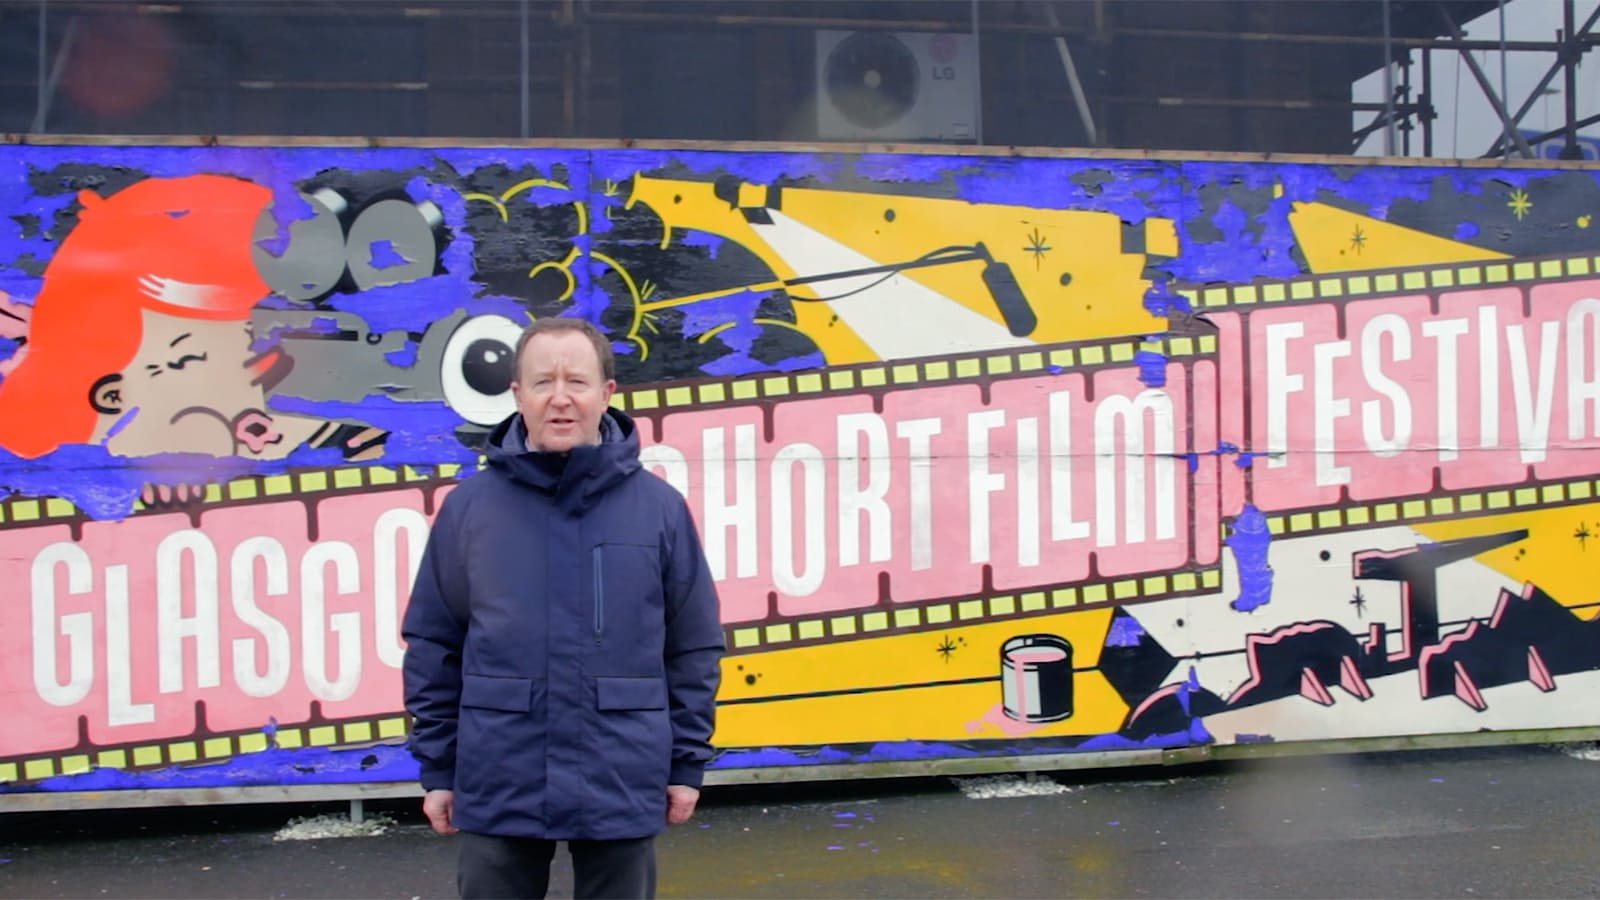 Photo of Jonathan Watson stood in front of a bus with 'Glasgow Short Film Festival' written on it